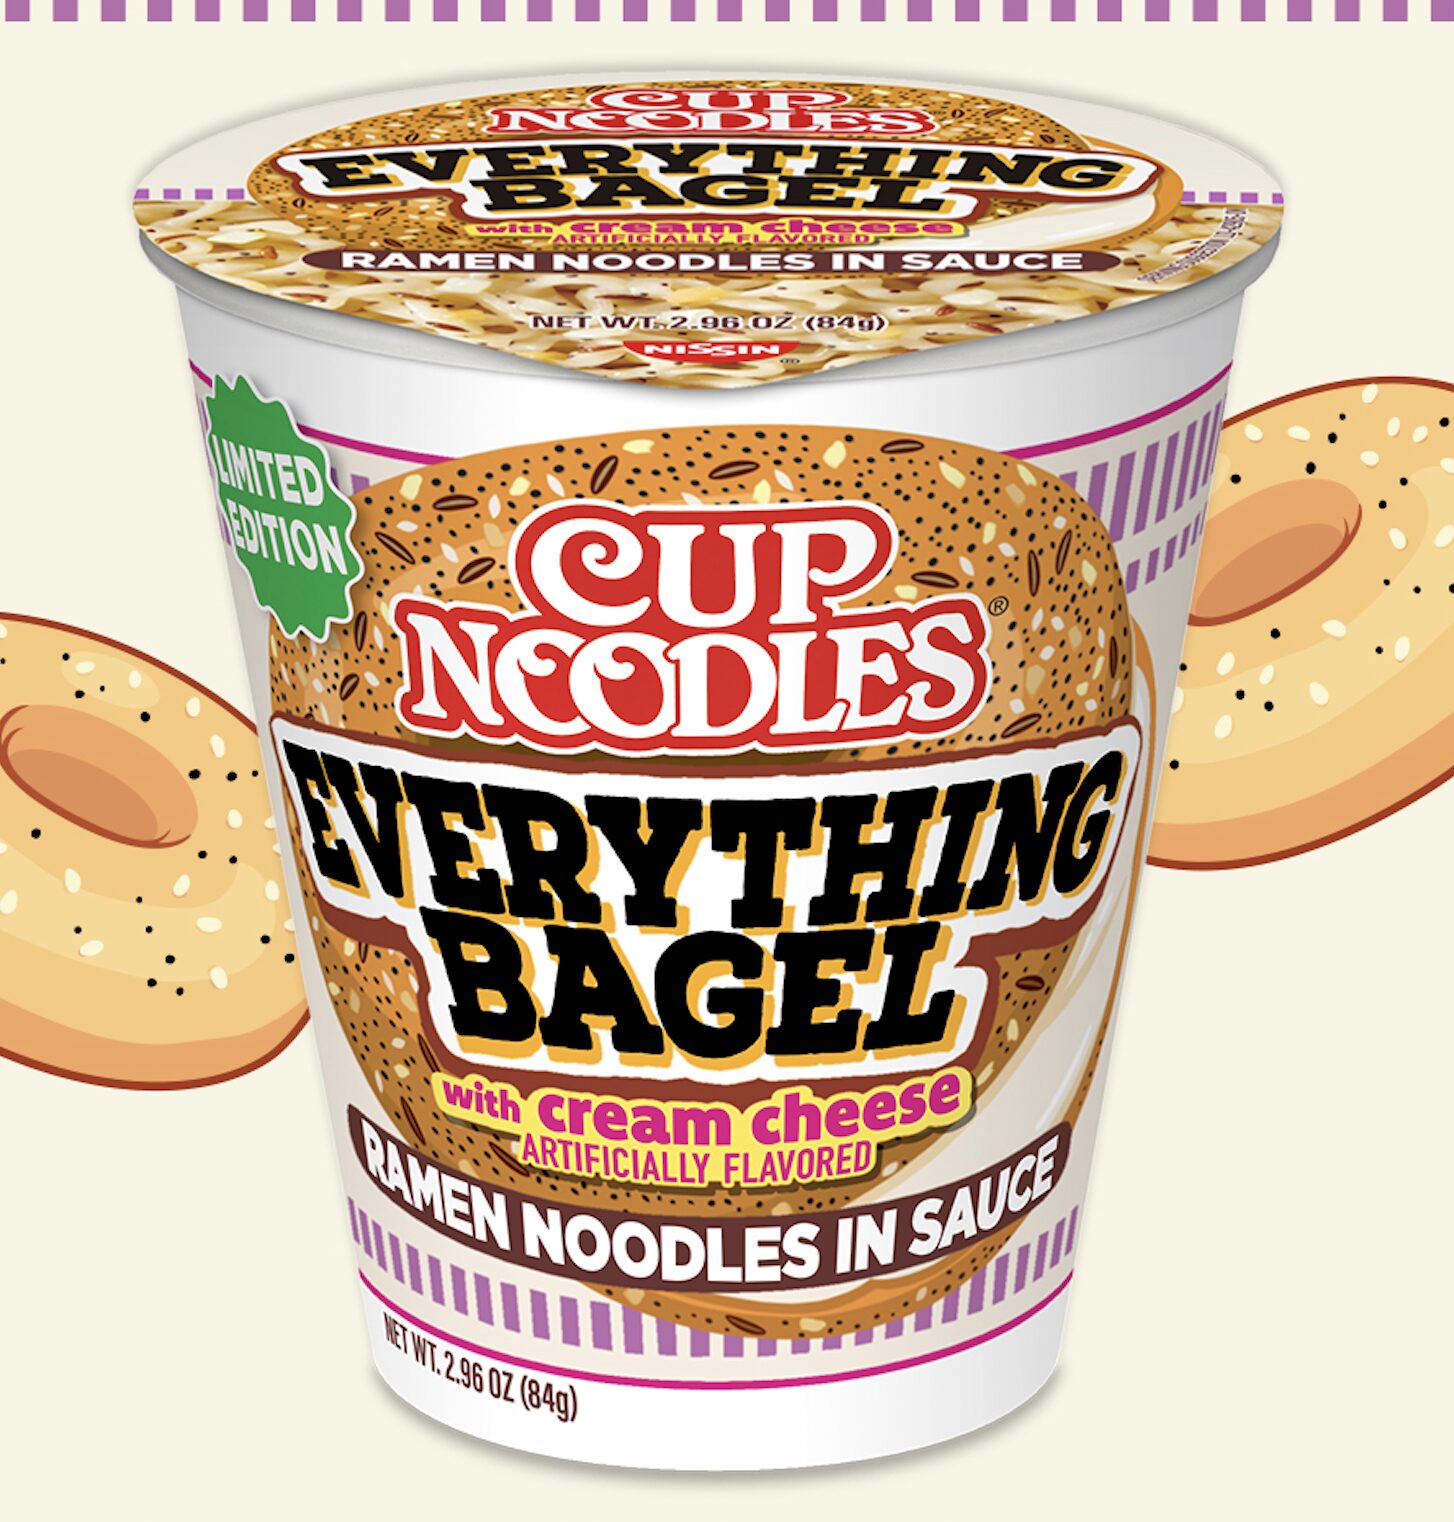 Cup Noodles Everything Bagel with Cream Cheese